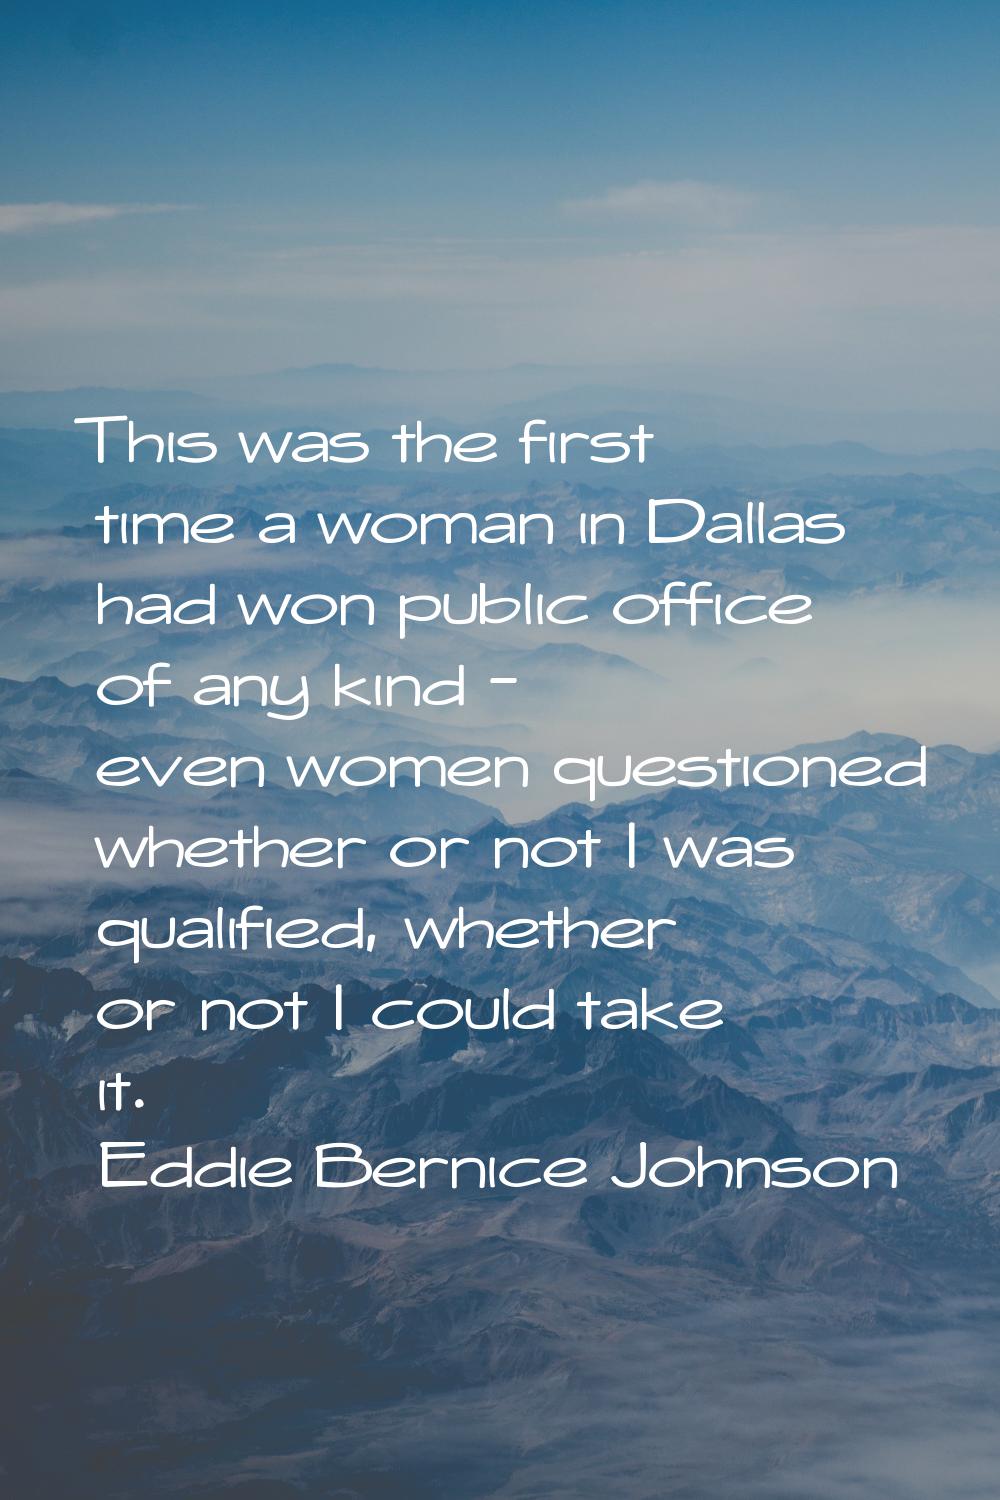 This was the first time a woman in Dallas had won public office of any kind - even women questioned